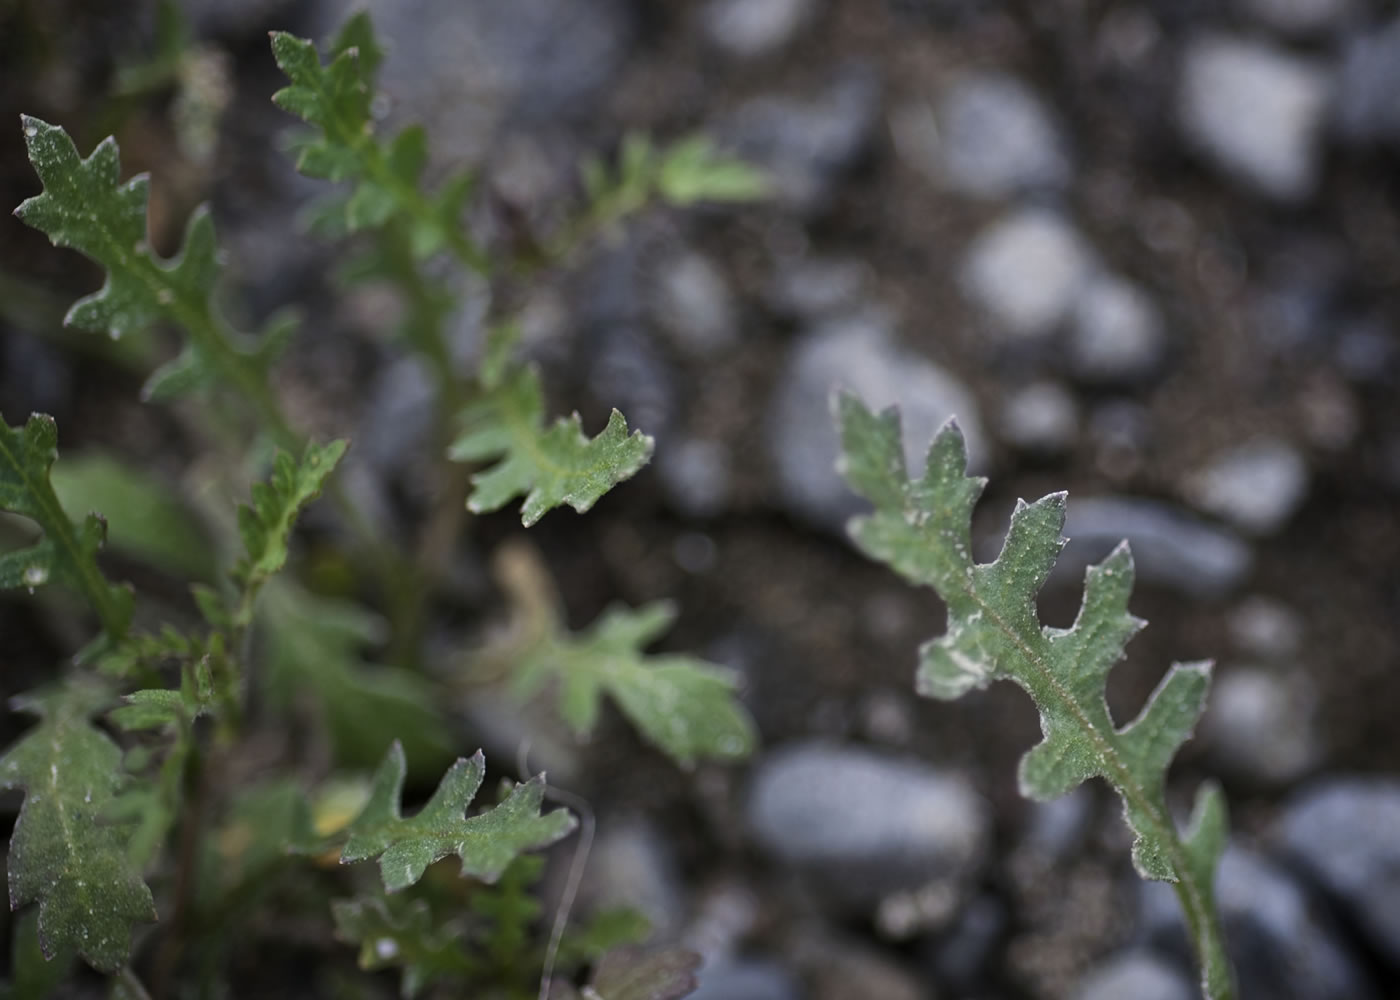 The persistent-sepal yellowcress is known to grow in only two places in the state: the Hanford Reach in South-central Washington, and a five-acre area on and around Pierce Island in the Columbia River Gorge.